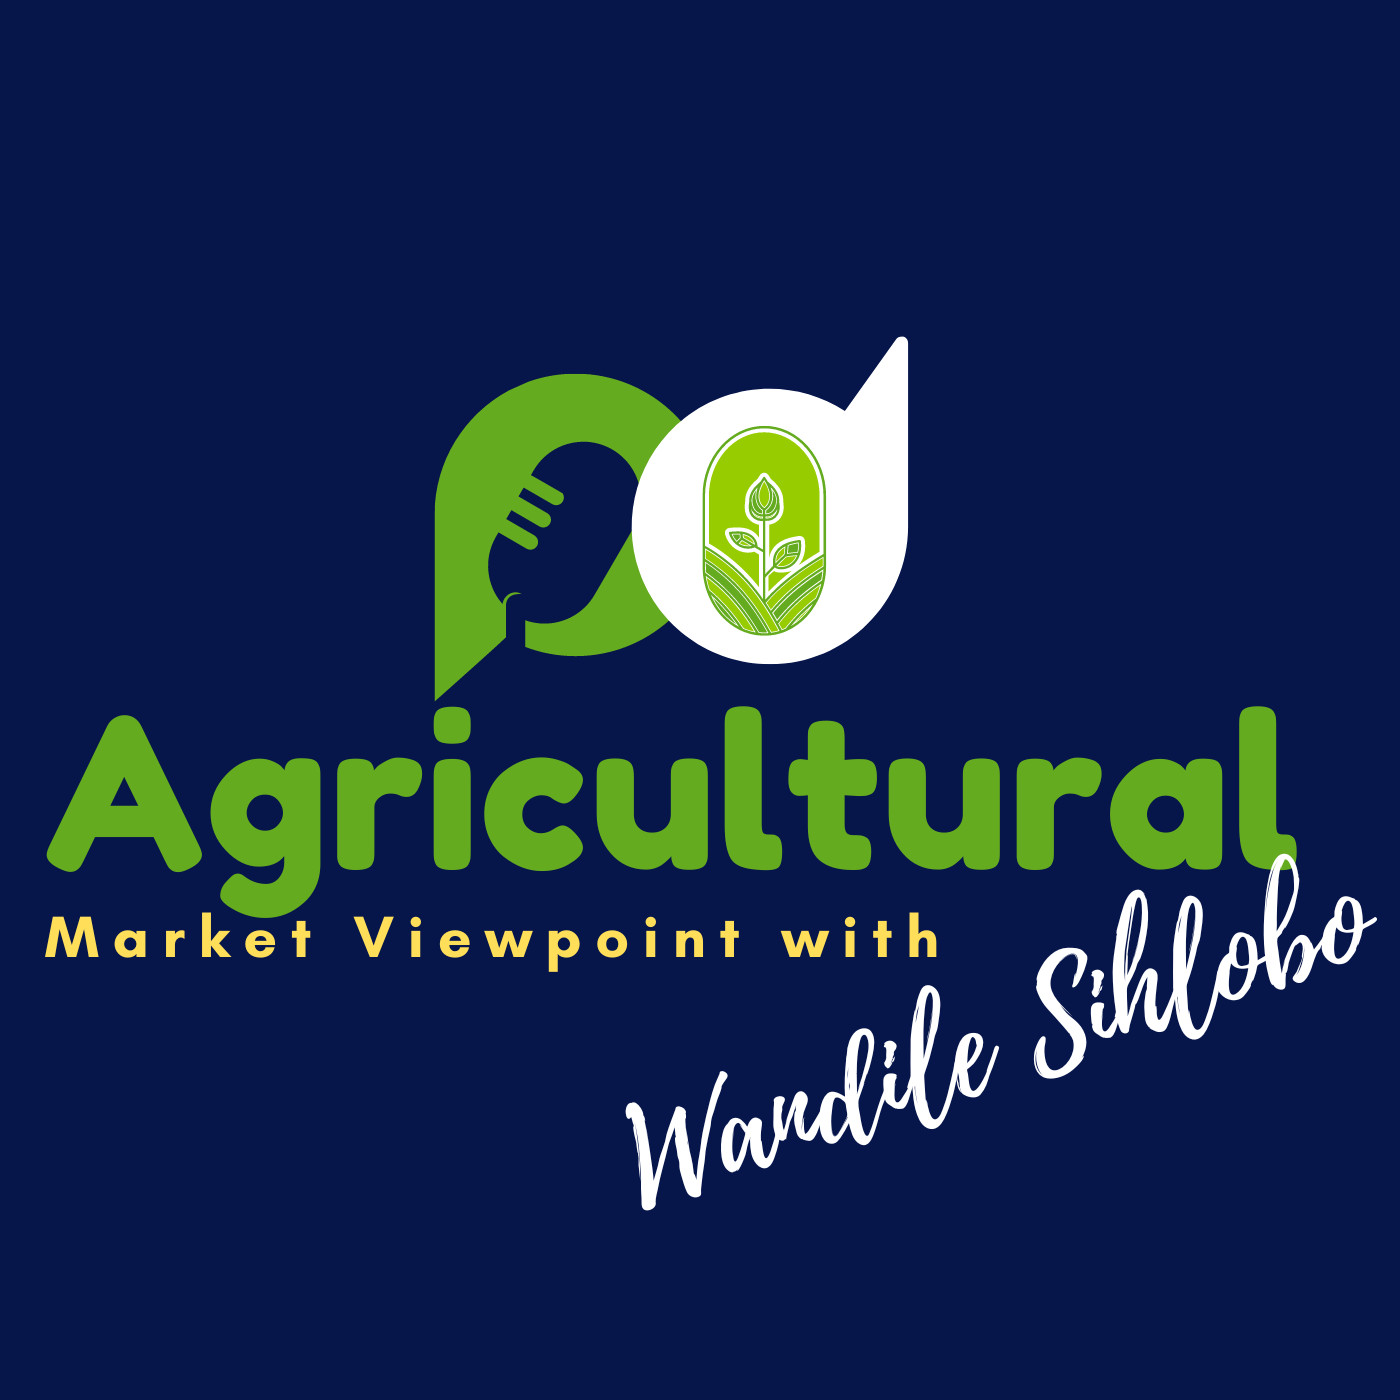 Achieving inclusive growth in South Africa's agriculture under the Government of National Unity